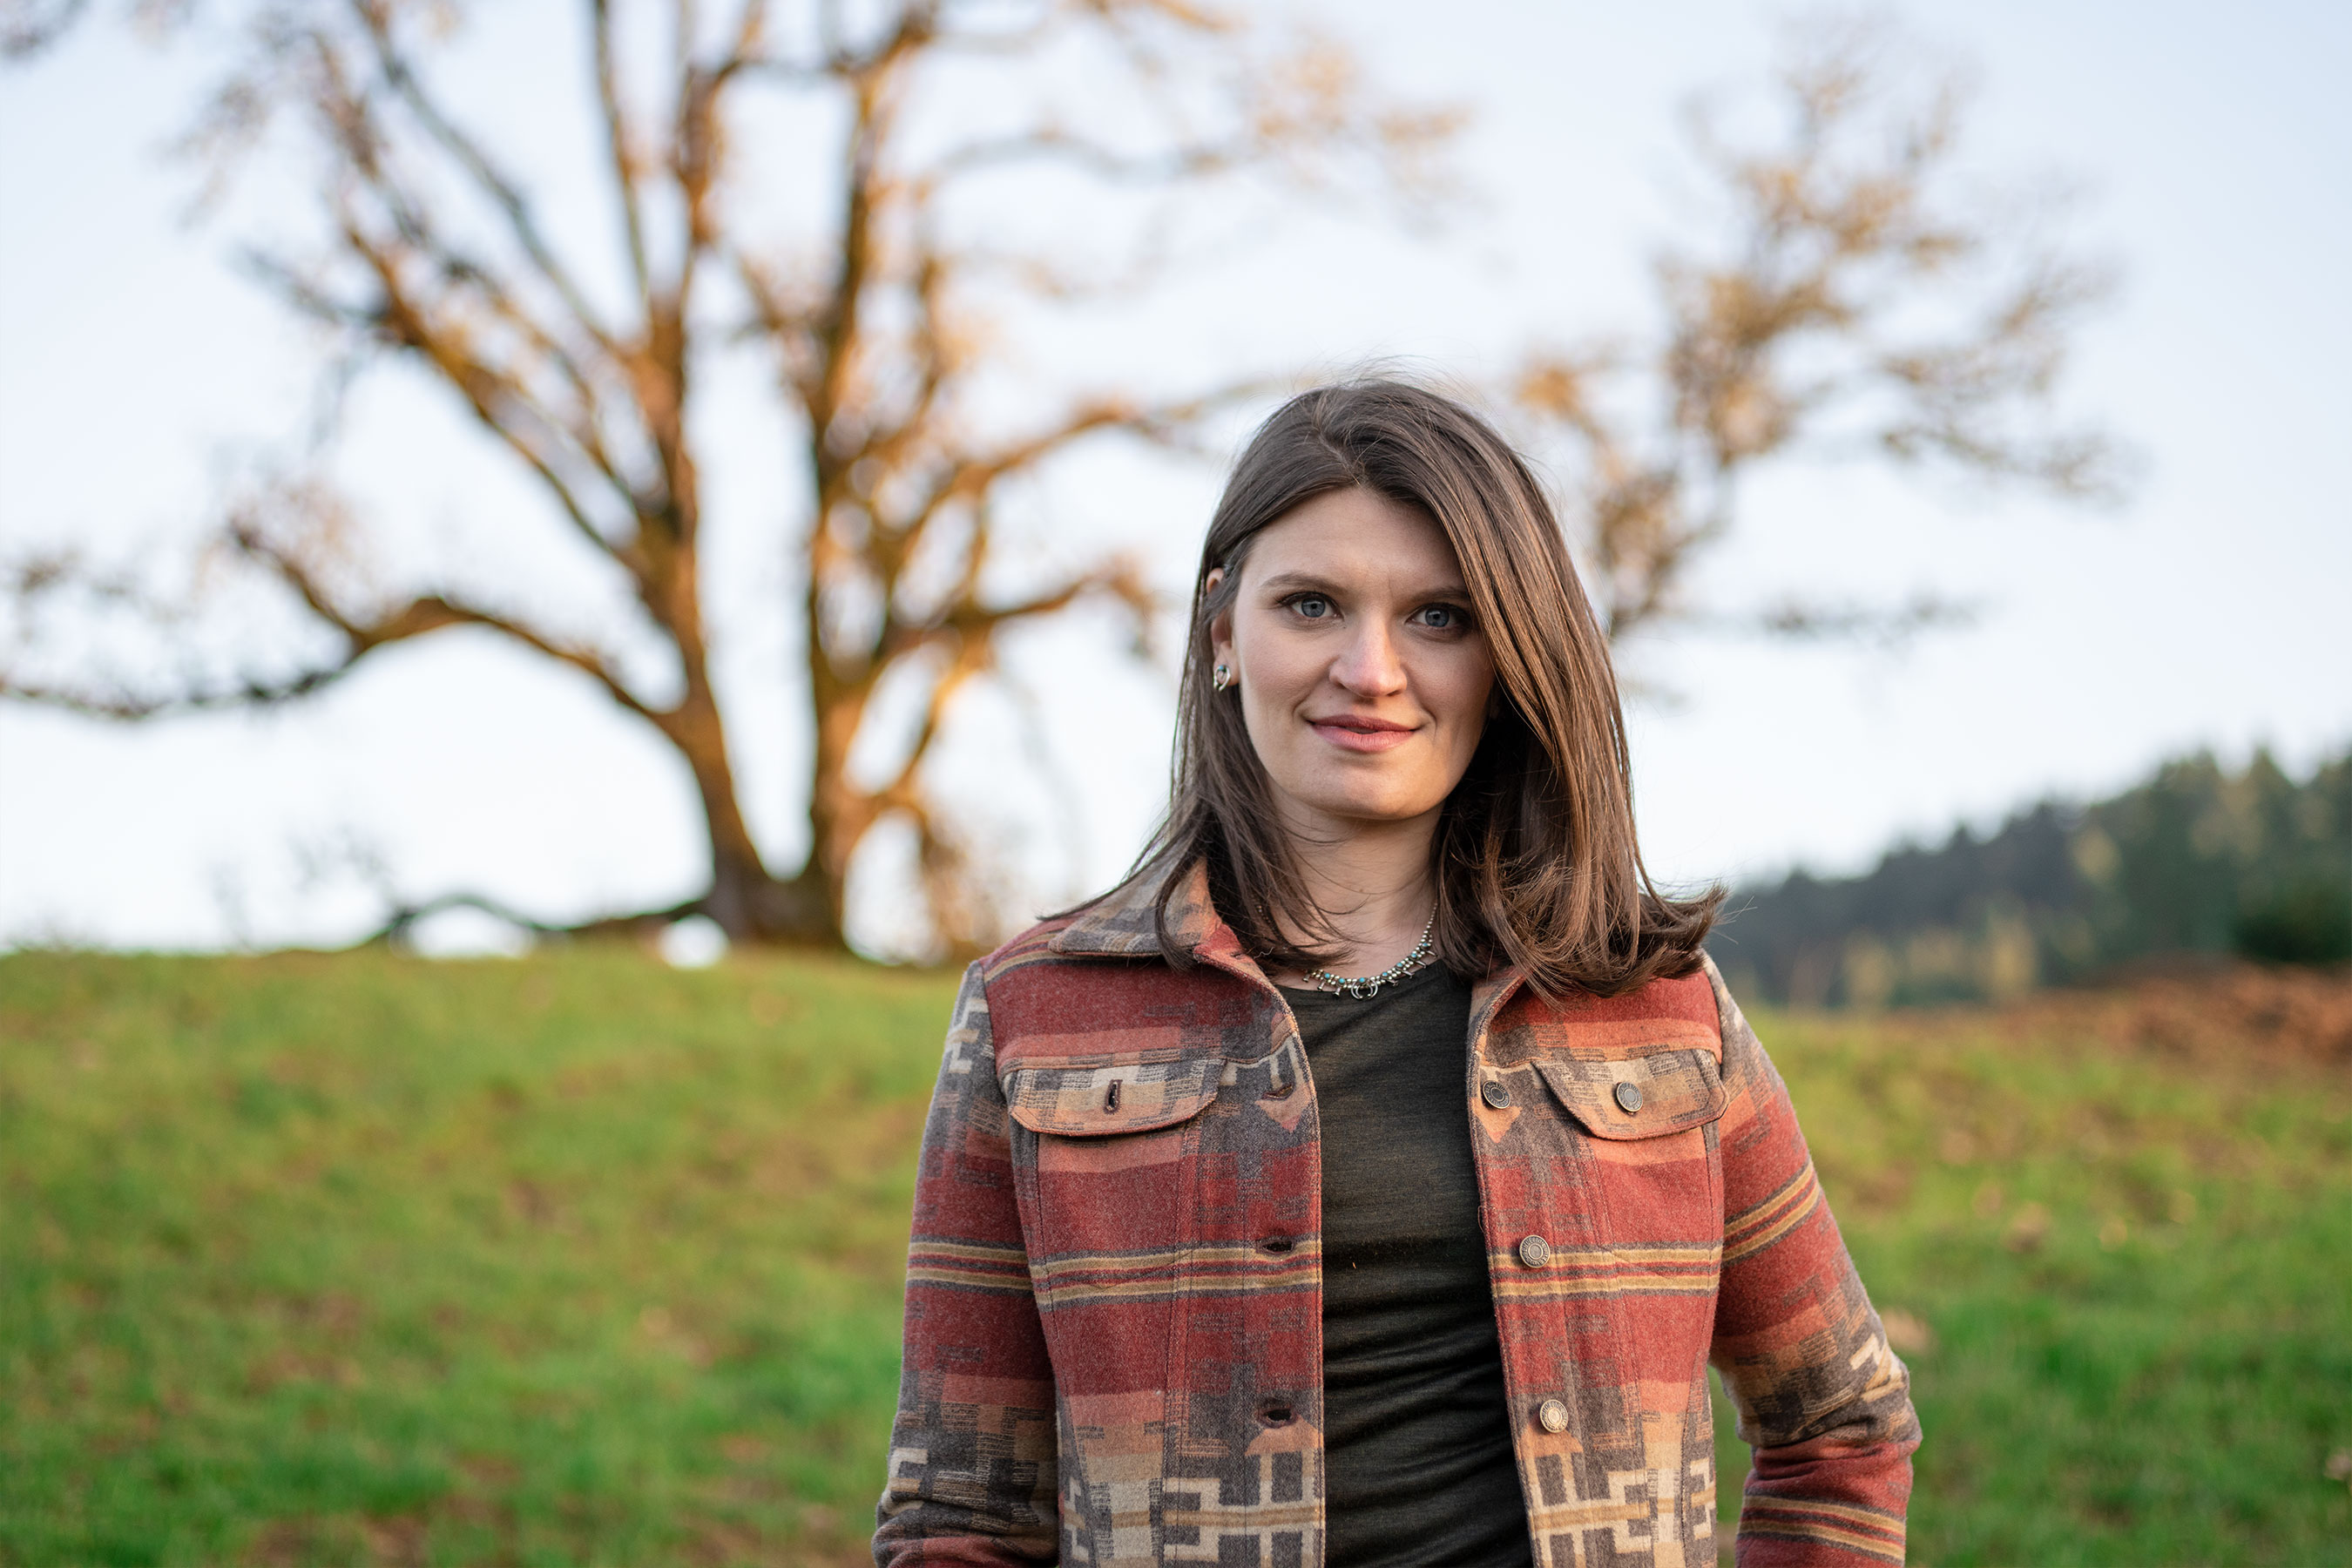 Wheyward Spirit founder, owner and CEO Emily Darchuk is a food scientist. She is part of a new generation of women revolutionizing the male-dominated wine and spirits industry.